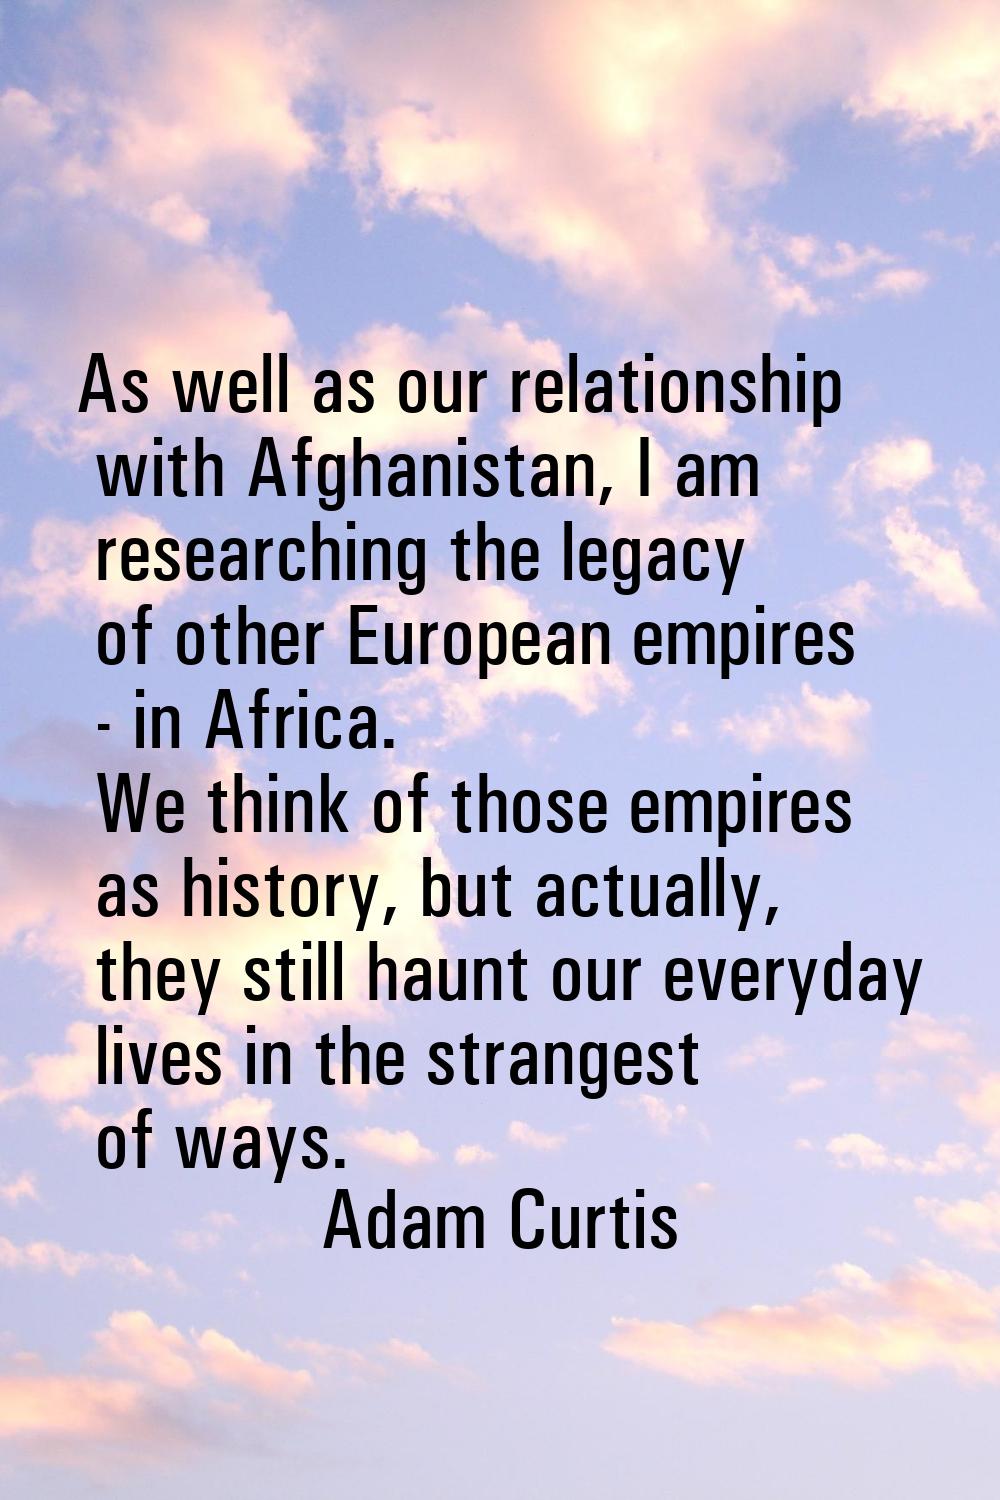 As well as our relationship with Afghanistan, I am researching the legacy of other European empires